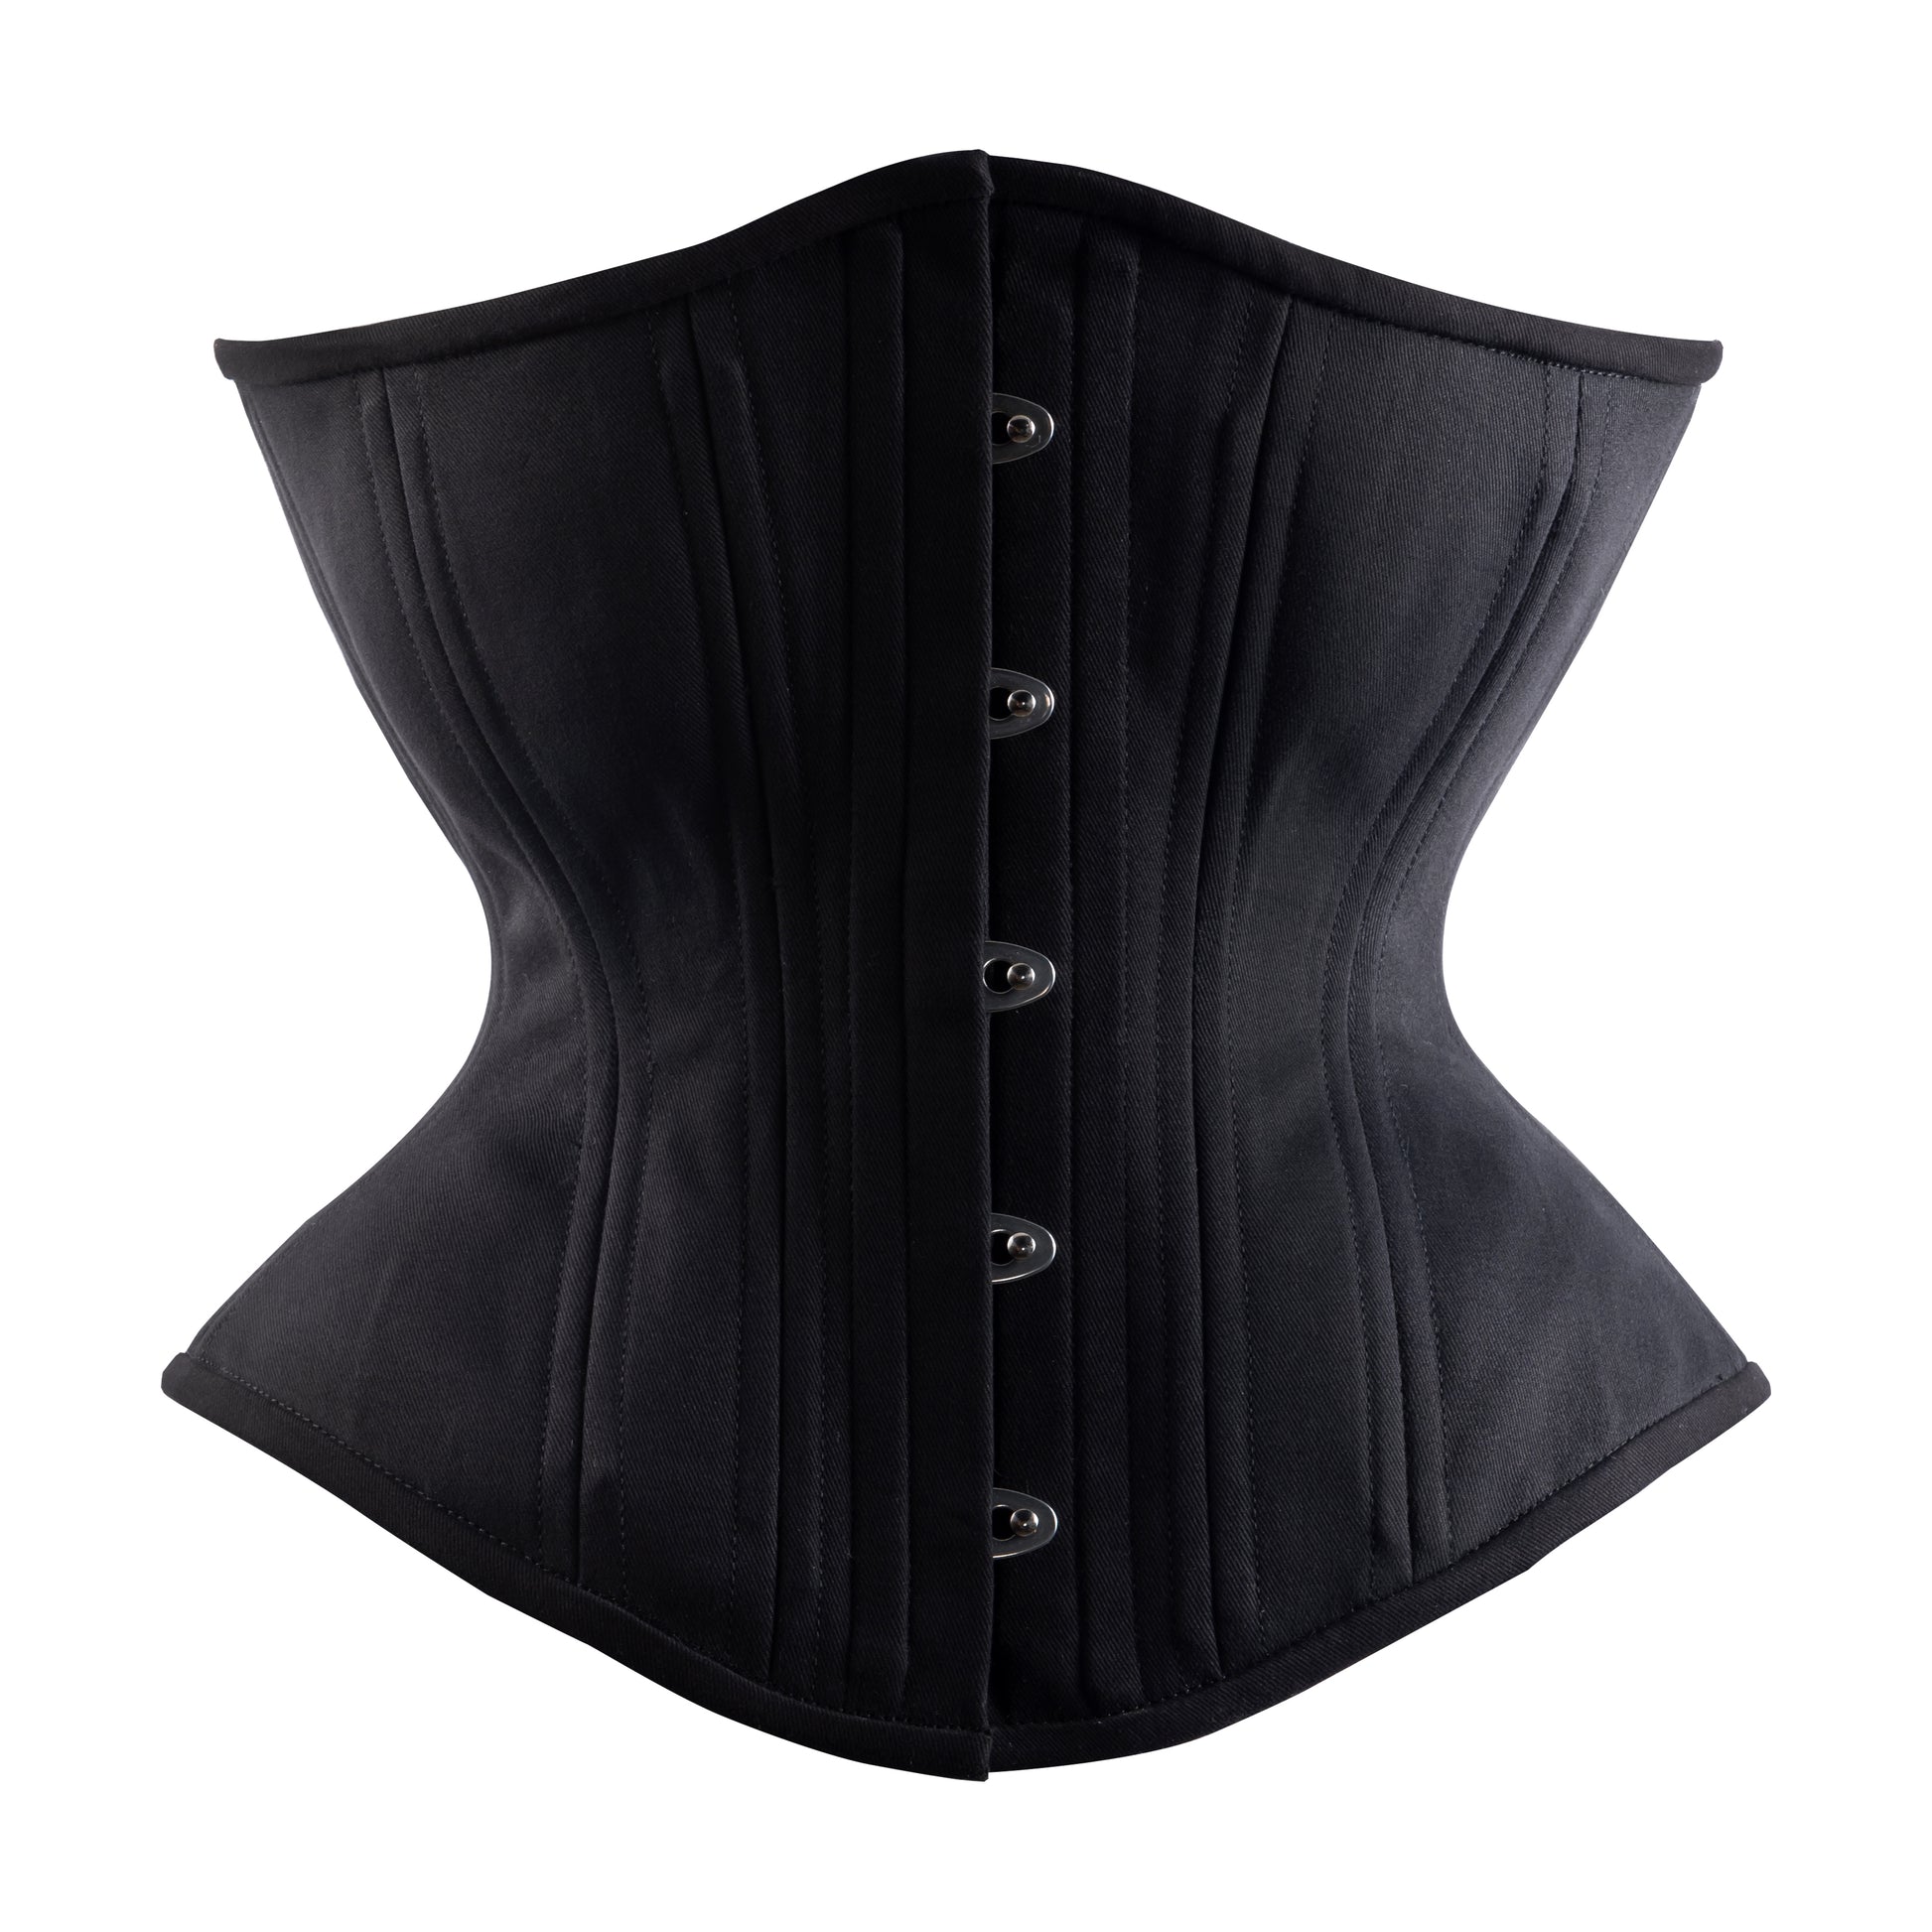 New Arrivals - New corsets every week! – Timeless Trends